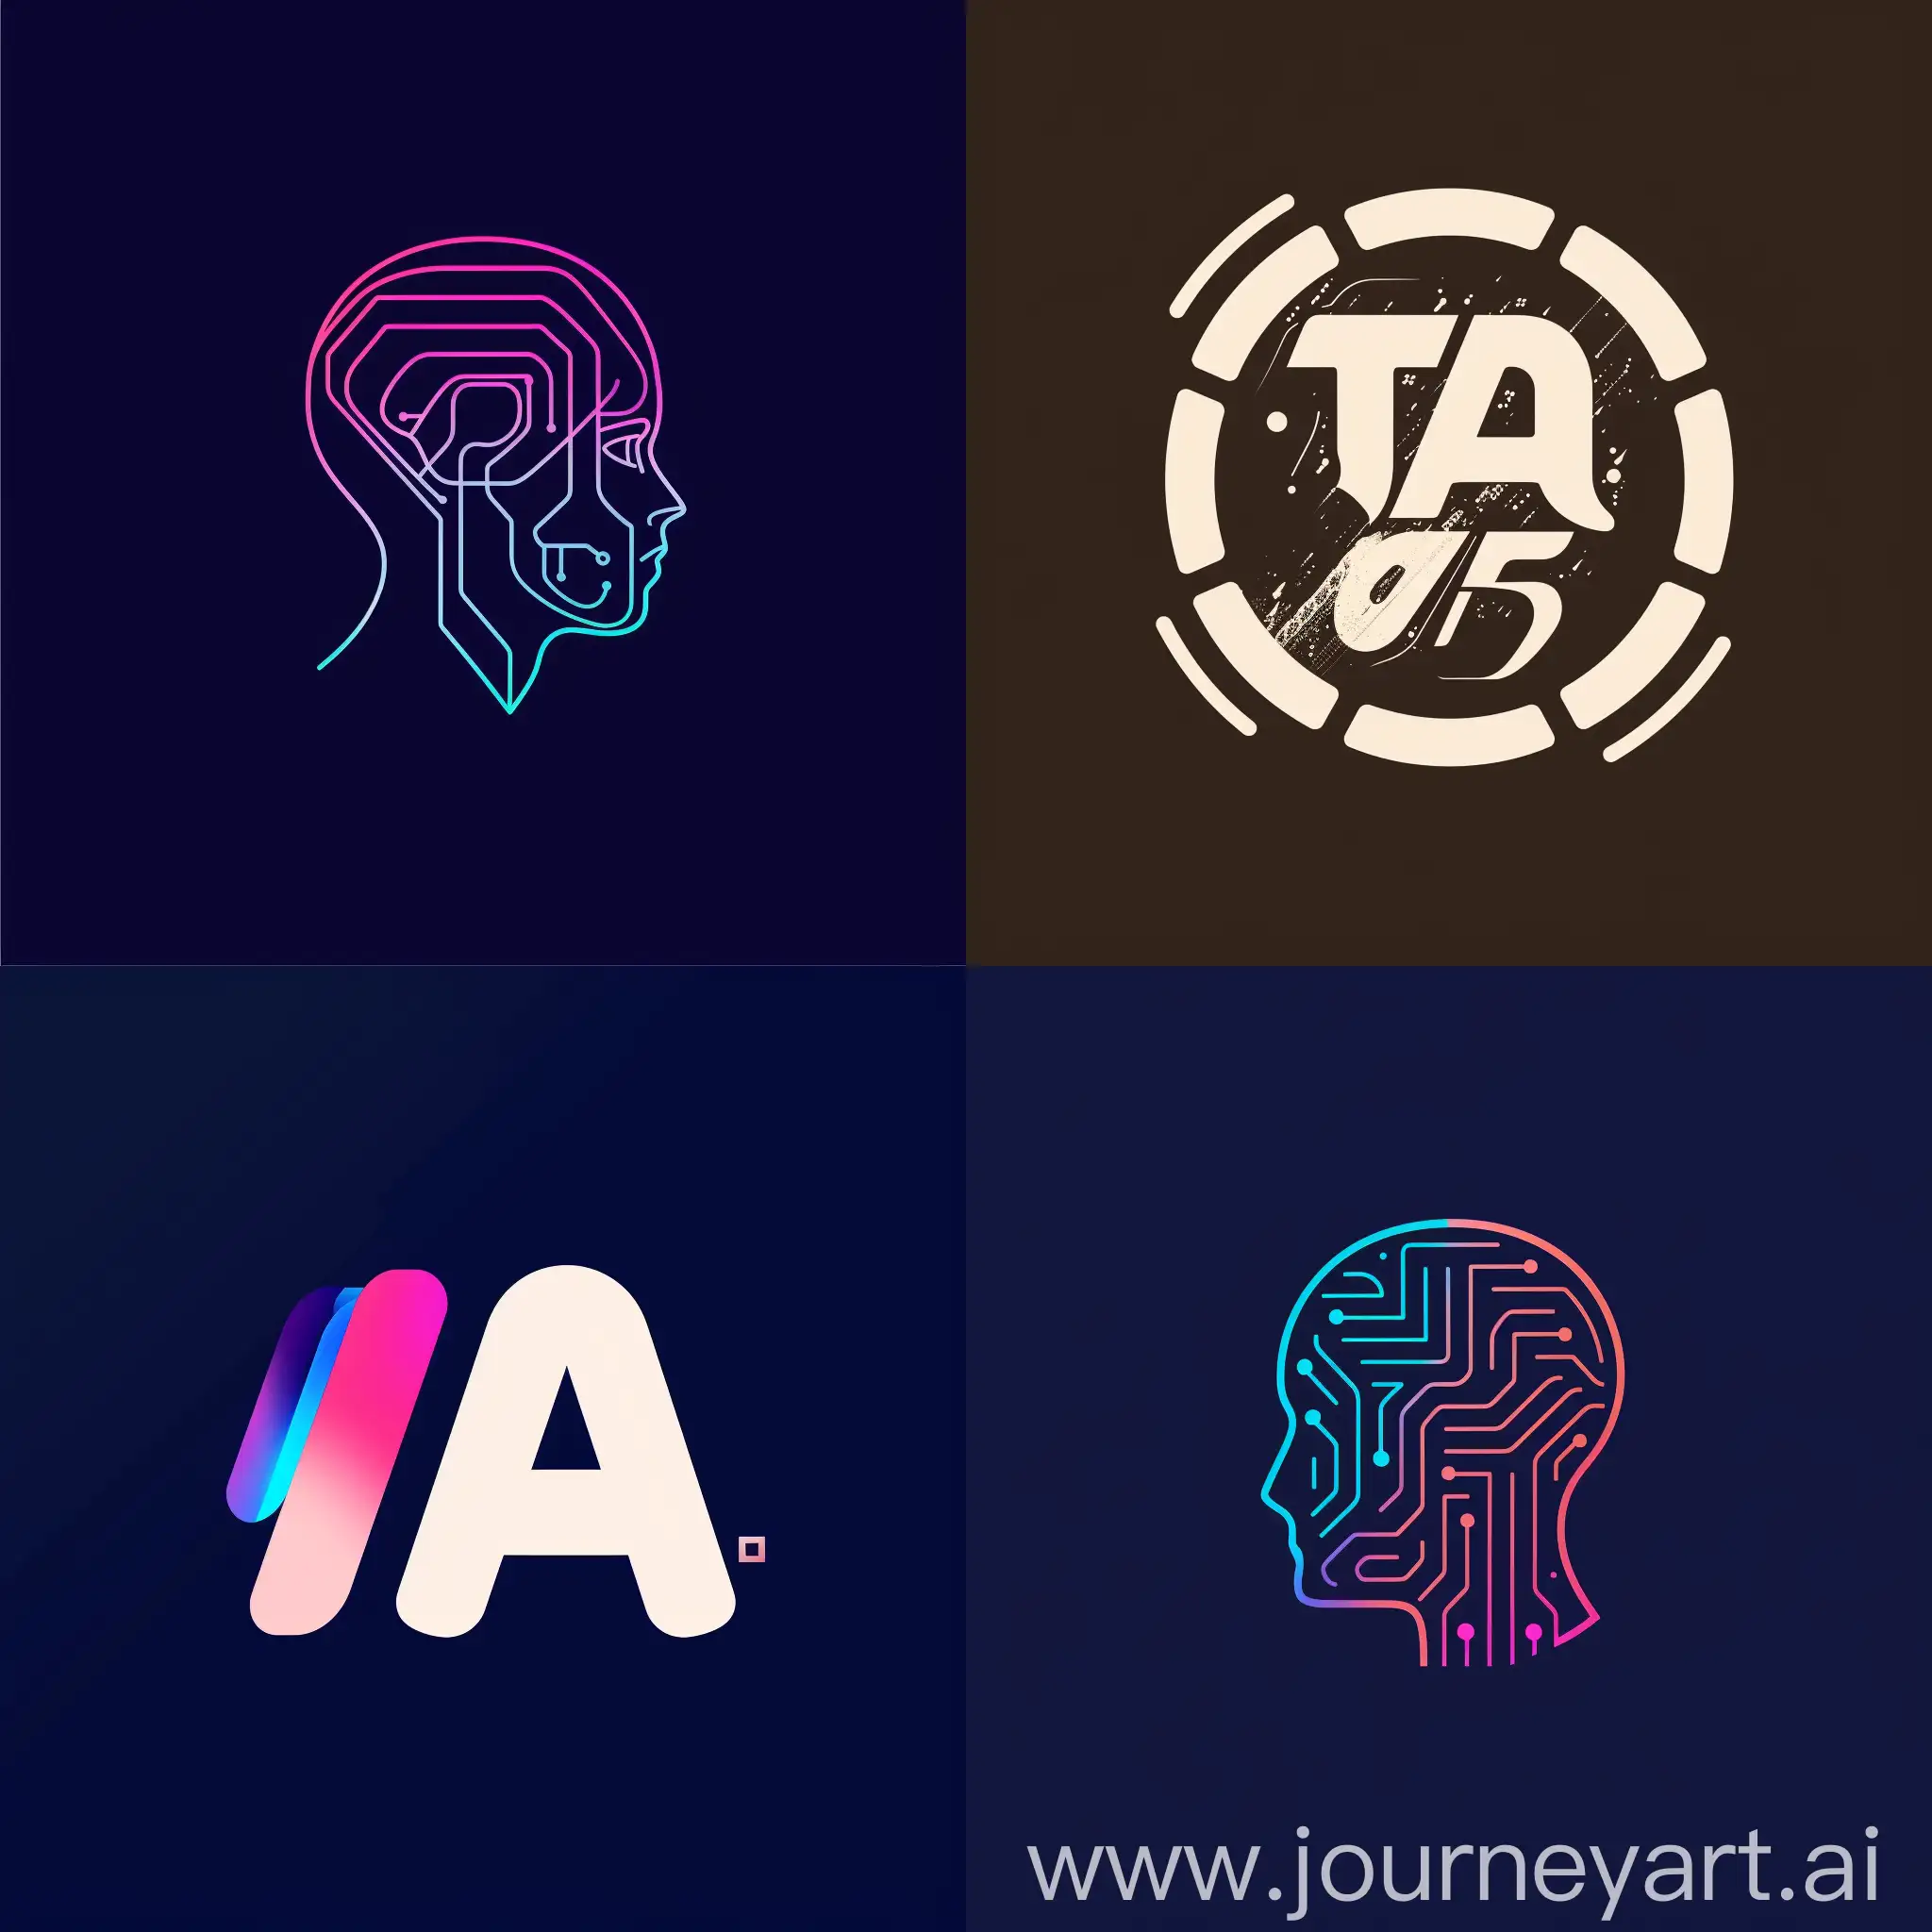 I want a logo for an Instagram page that is about artificial intelligence.